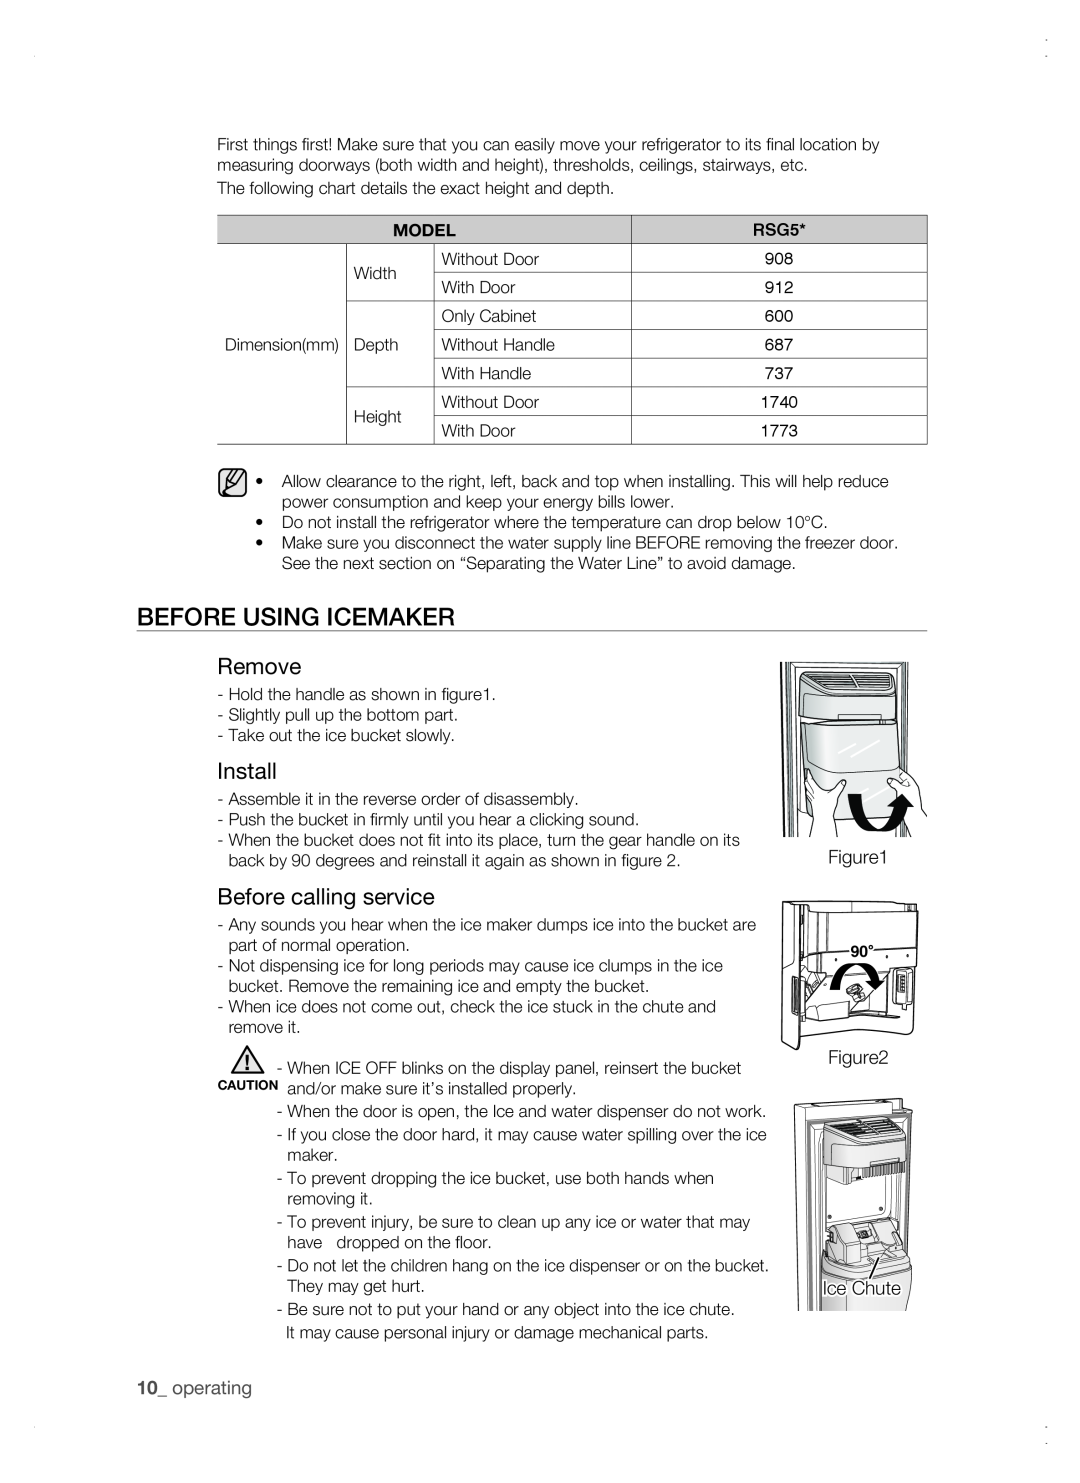 Samsung RSG5 user manual before using icemaker, Remove, Install, Before calling service, operating 